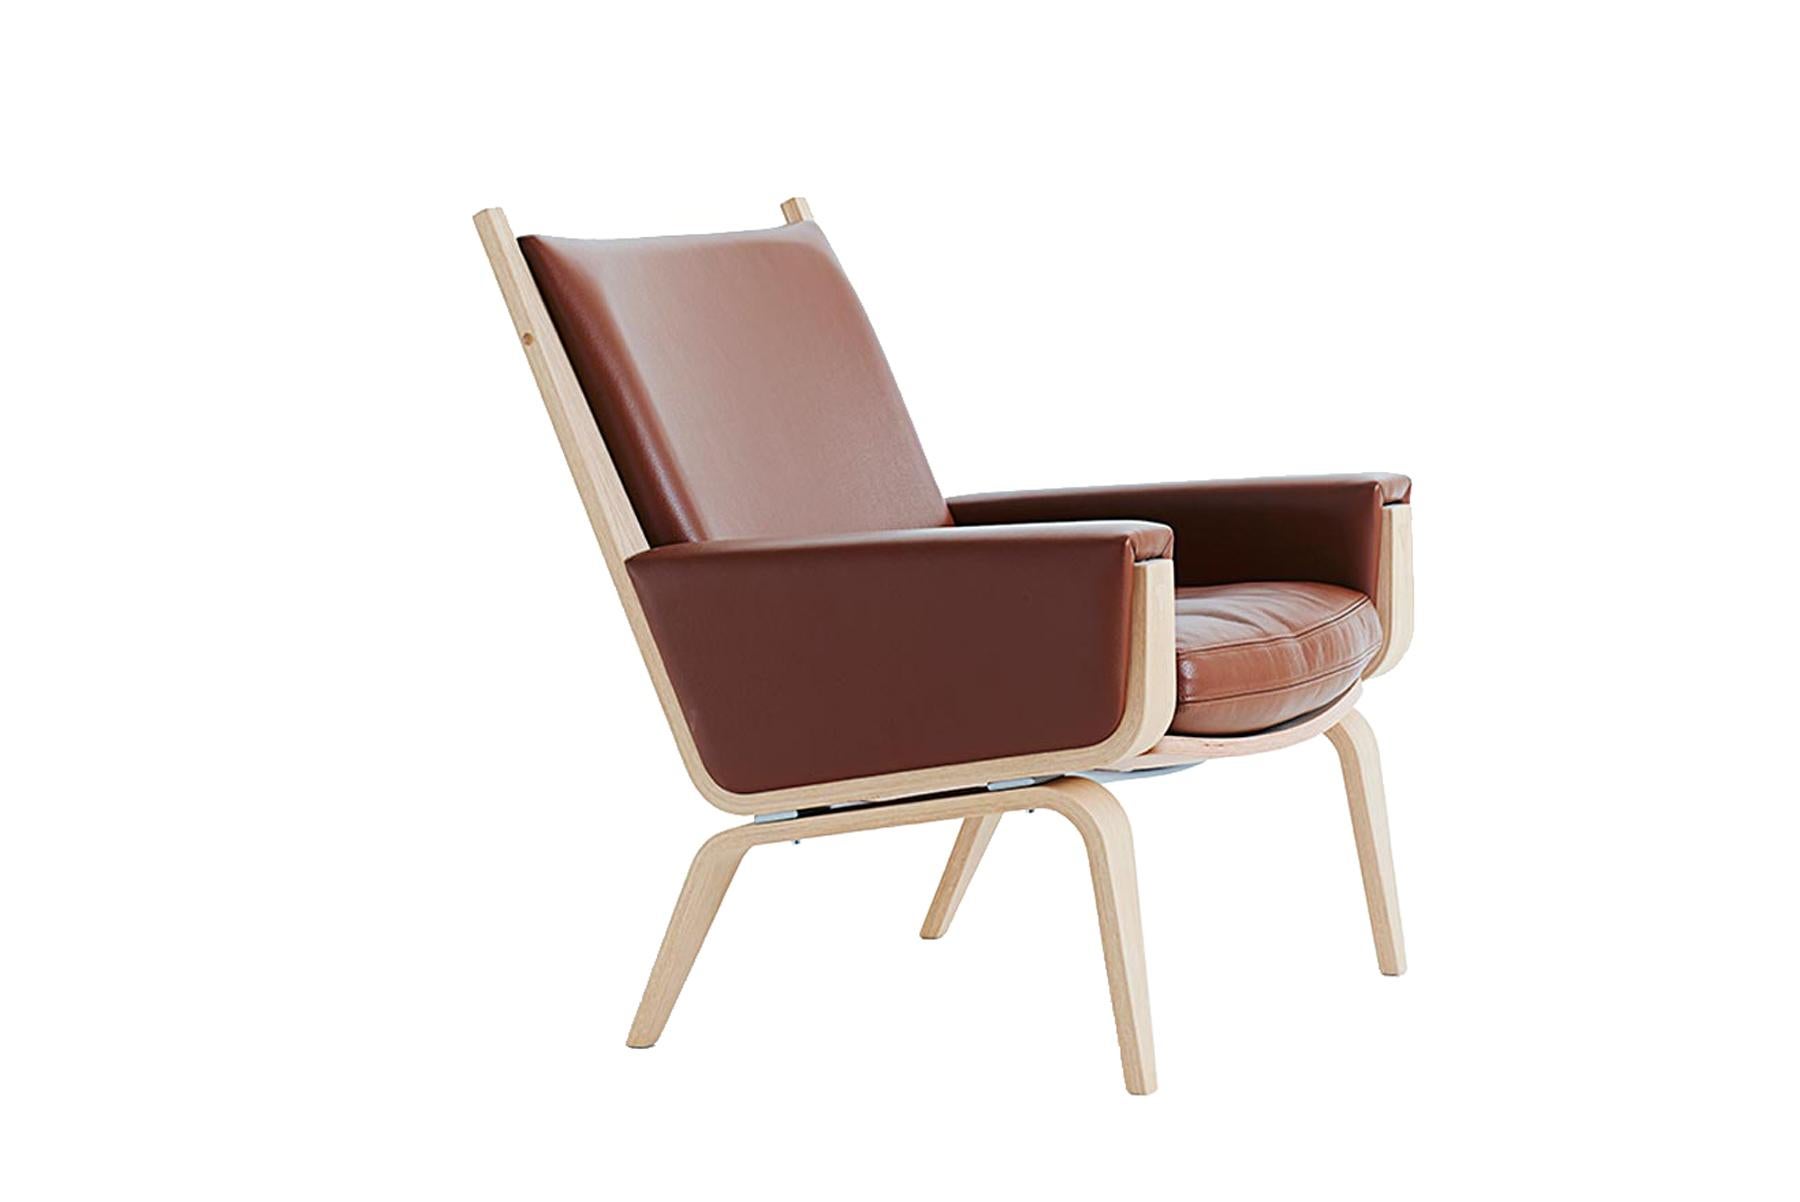 Designed in 1967 by Hans Wegner, the 501A high back lounge chair blends timeless elegance and comfort. Crafted in laminated, bent oak and hand built at GETAMA’s factory in Gedsted, Denmark by skilled cabinetmakers using traditional Scandinavian